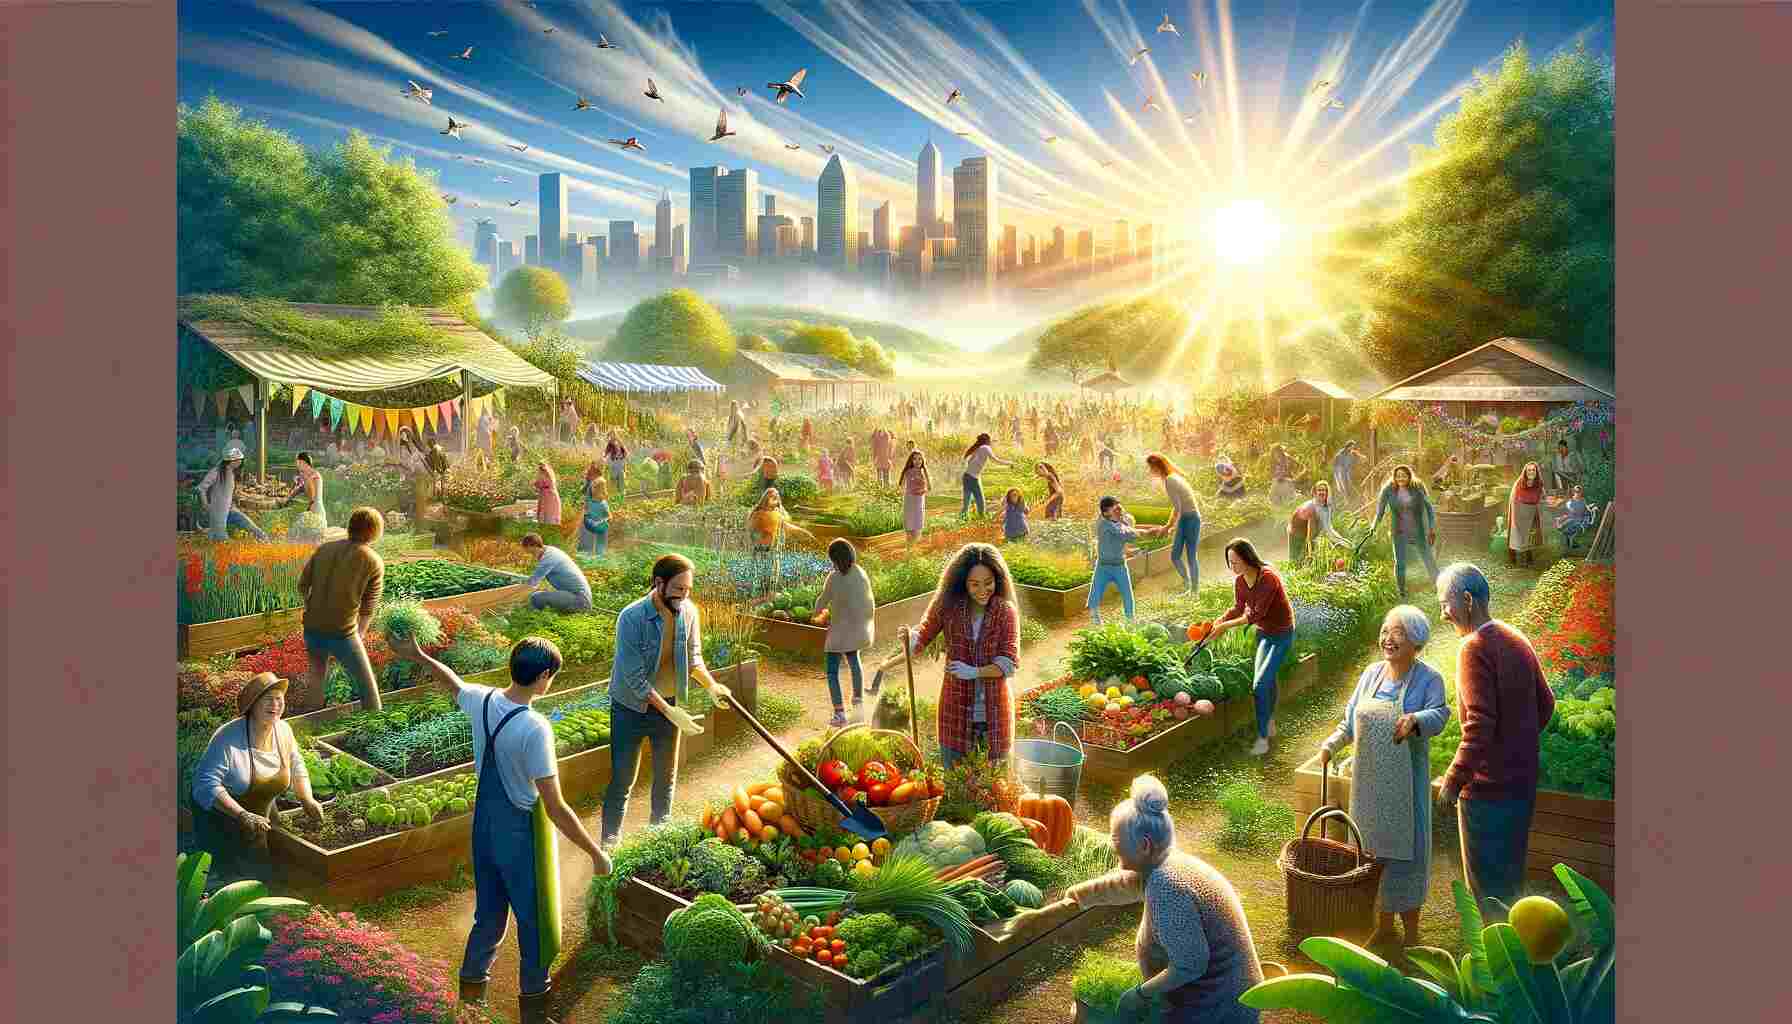 Here is the featured image depicting the rise of volunteer gardening in 2024, showcasing a diverse group of people engaging in gardening activities in a lush, community garden with a blend of urban and natural environments.